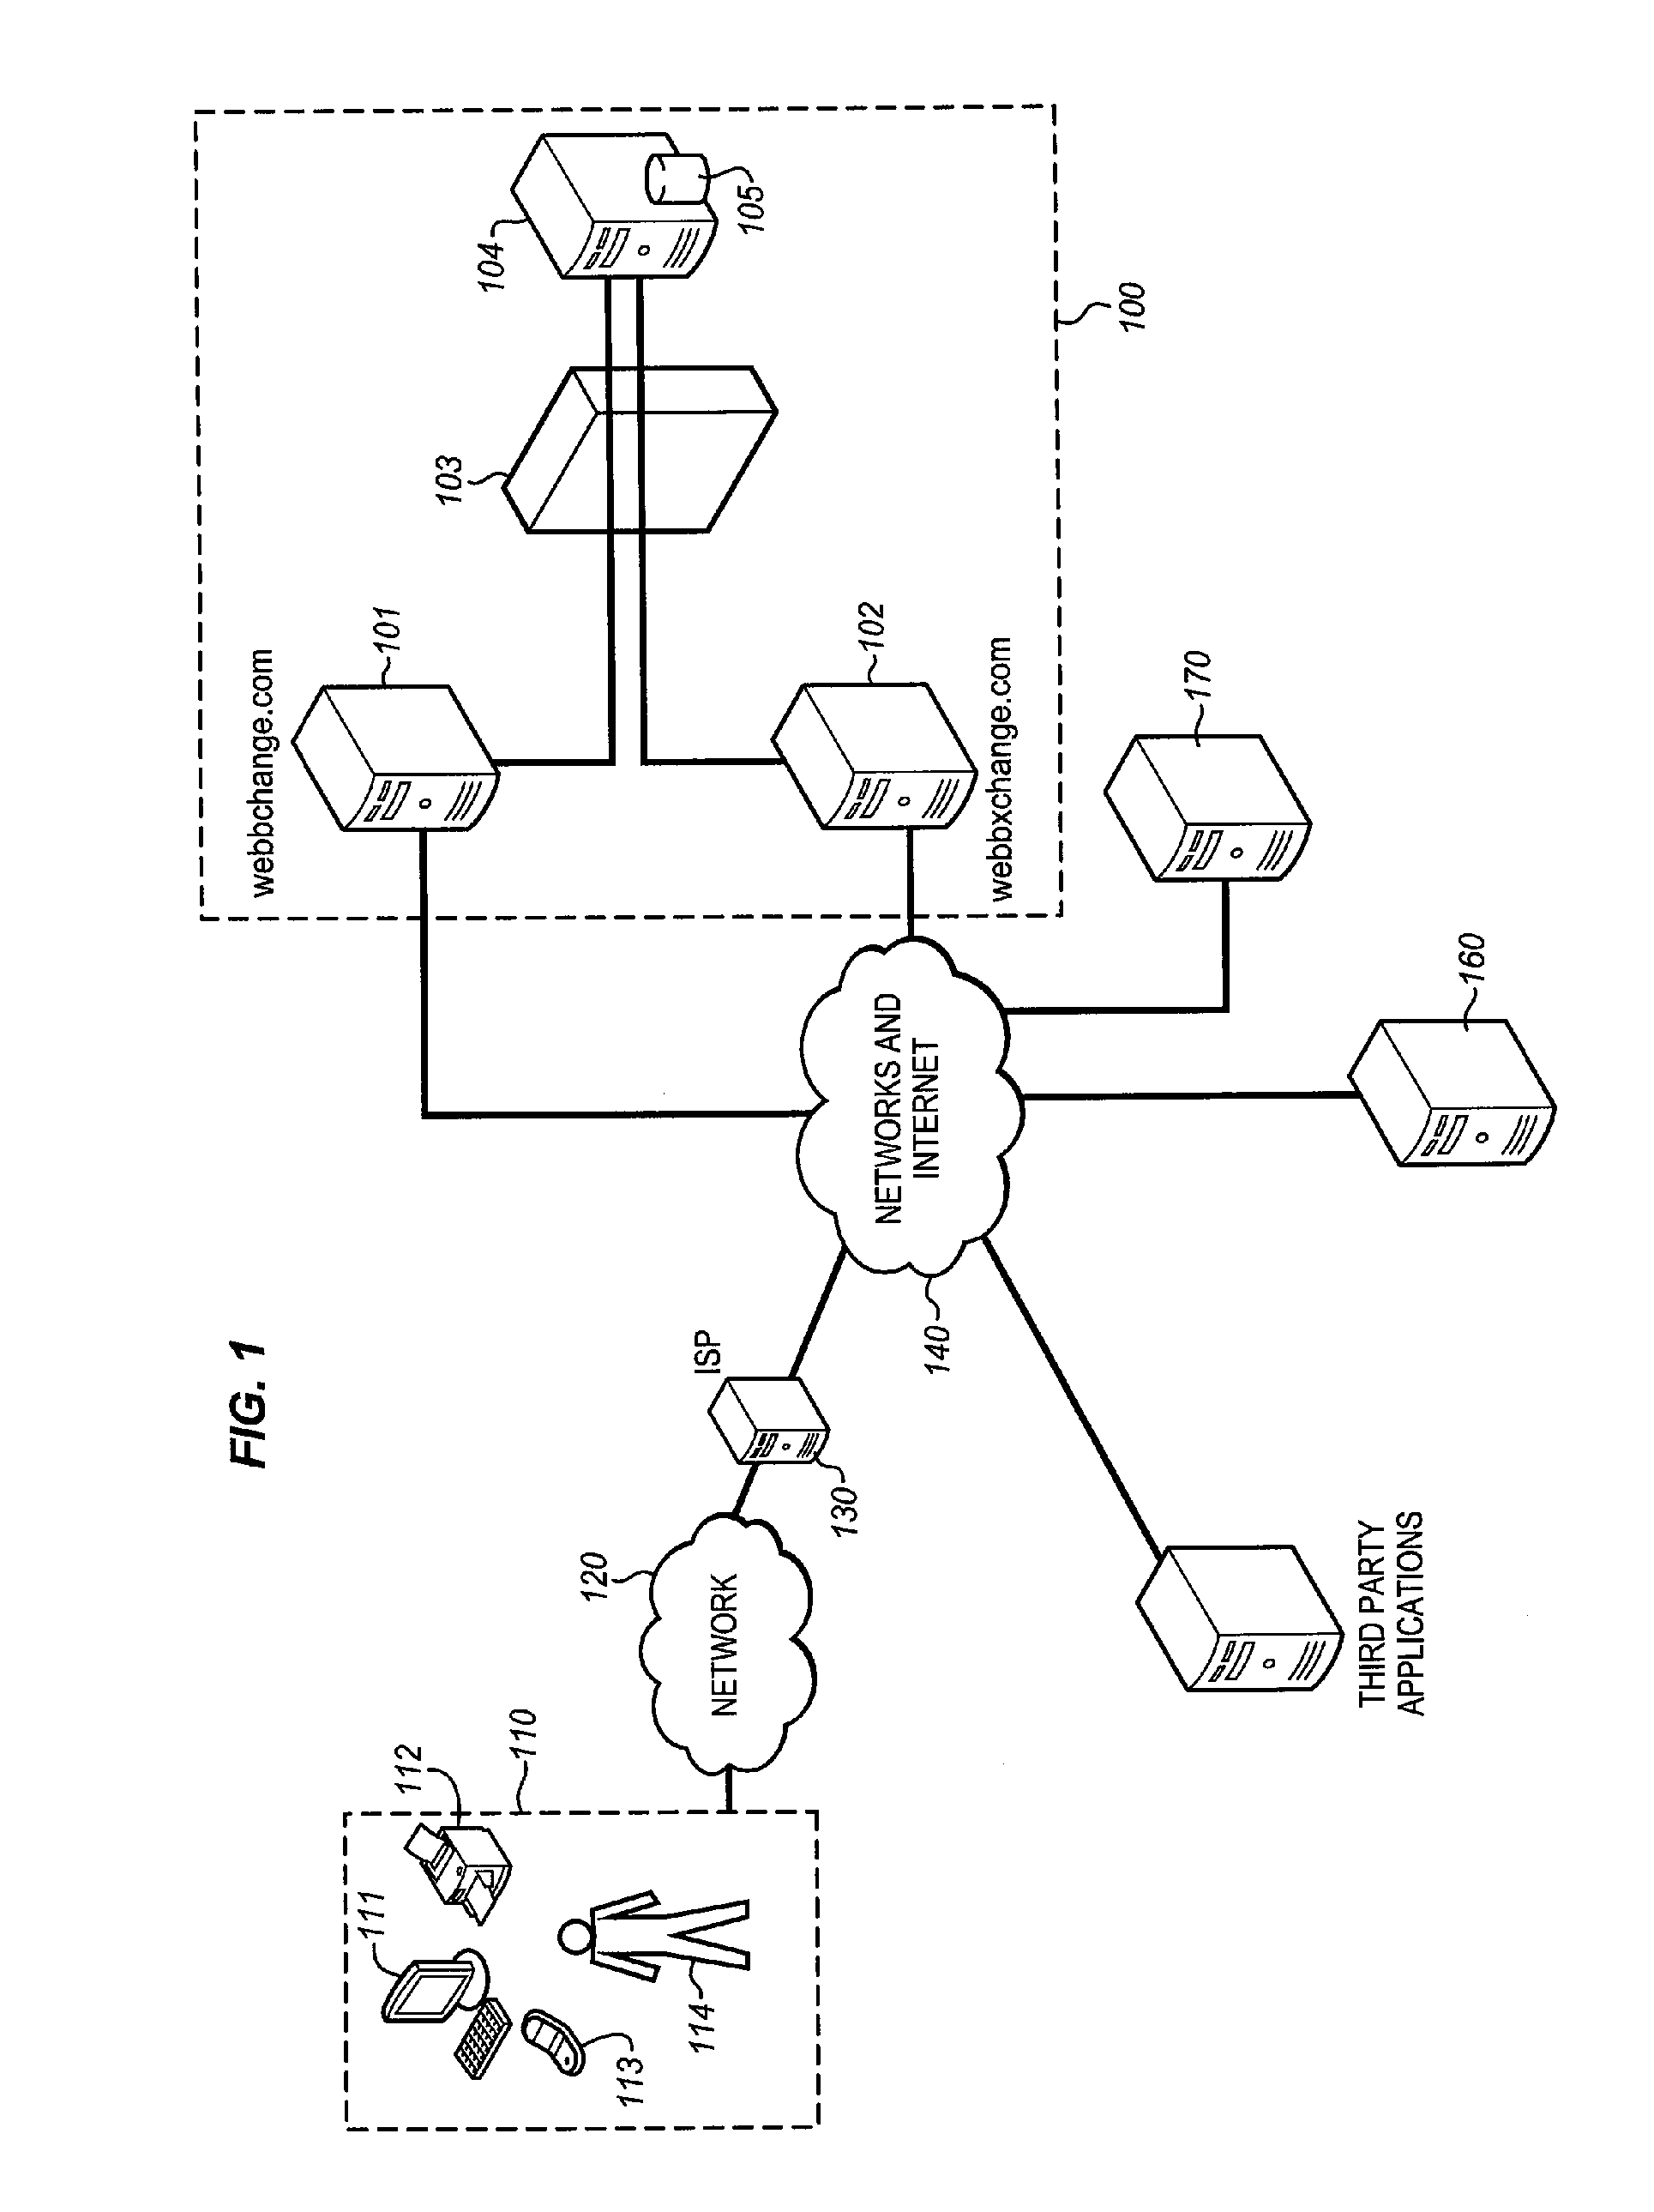 System for determining the intrinsic value provided to internet users by selected web sites